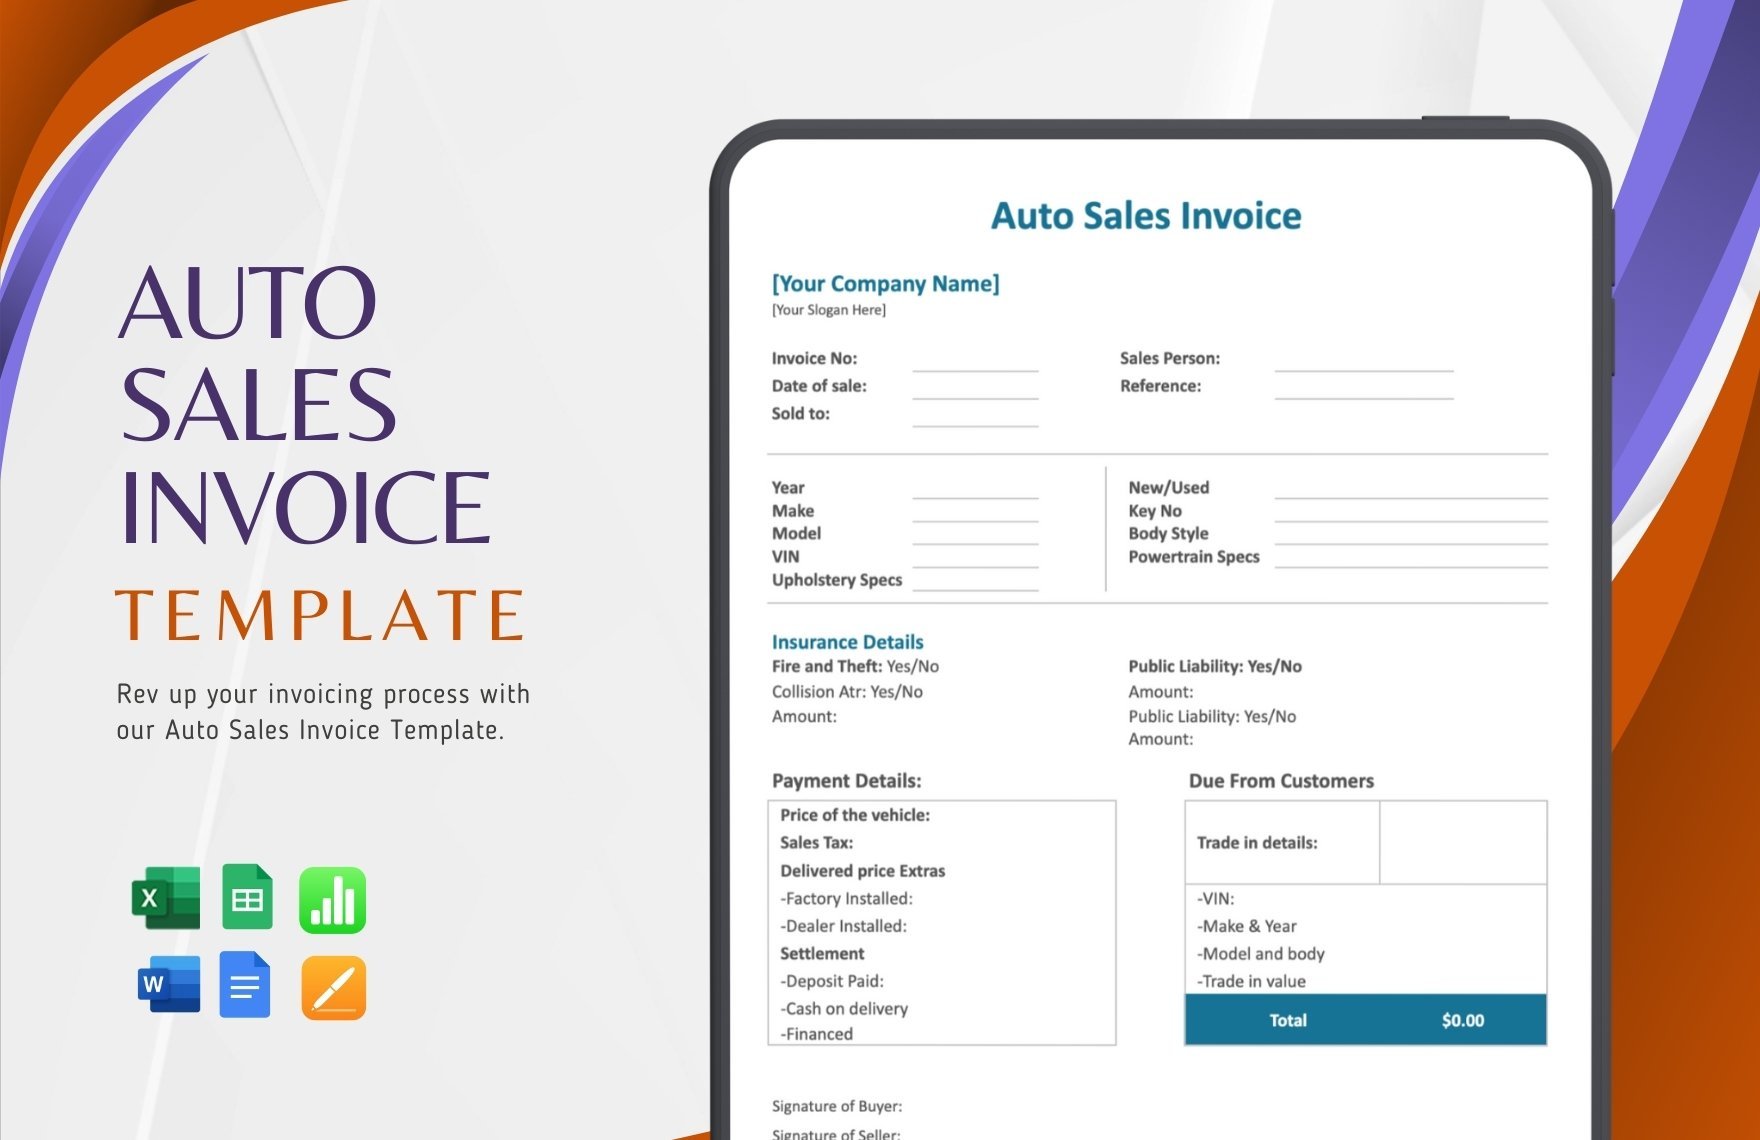 Auto Sales Invoice Template in Word, Google Docs, Excel, Google Sheets, Apple Pages, Apple Numbers